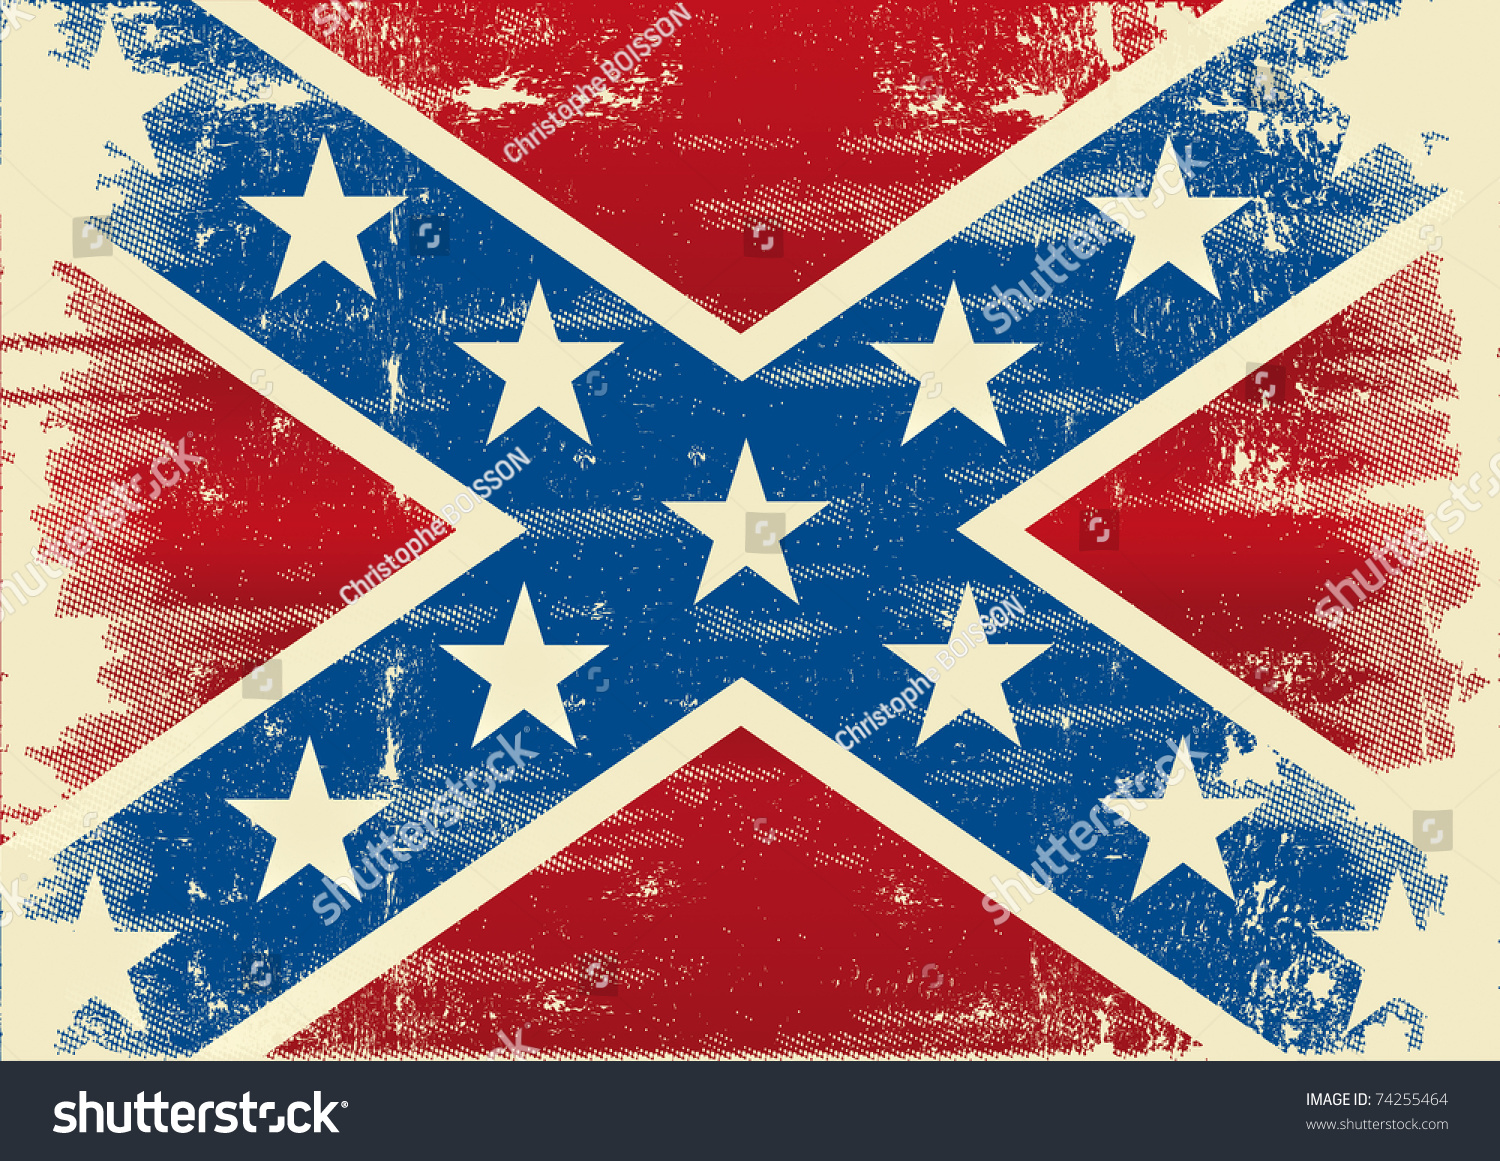 SVG of Confederate flag. A background for a poster svg